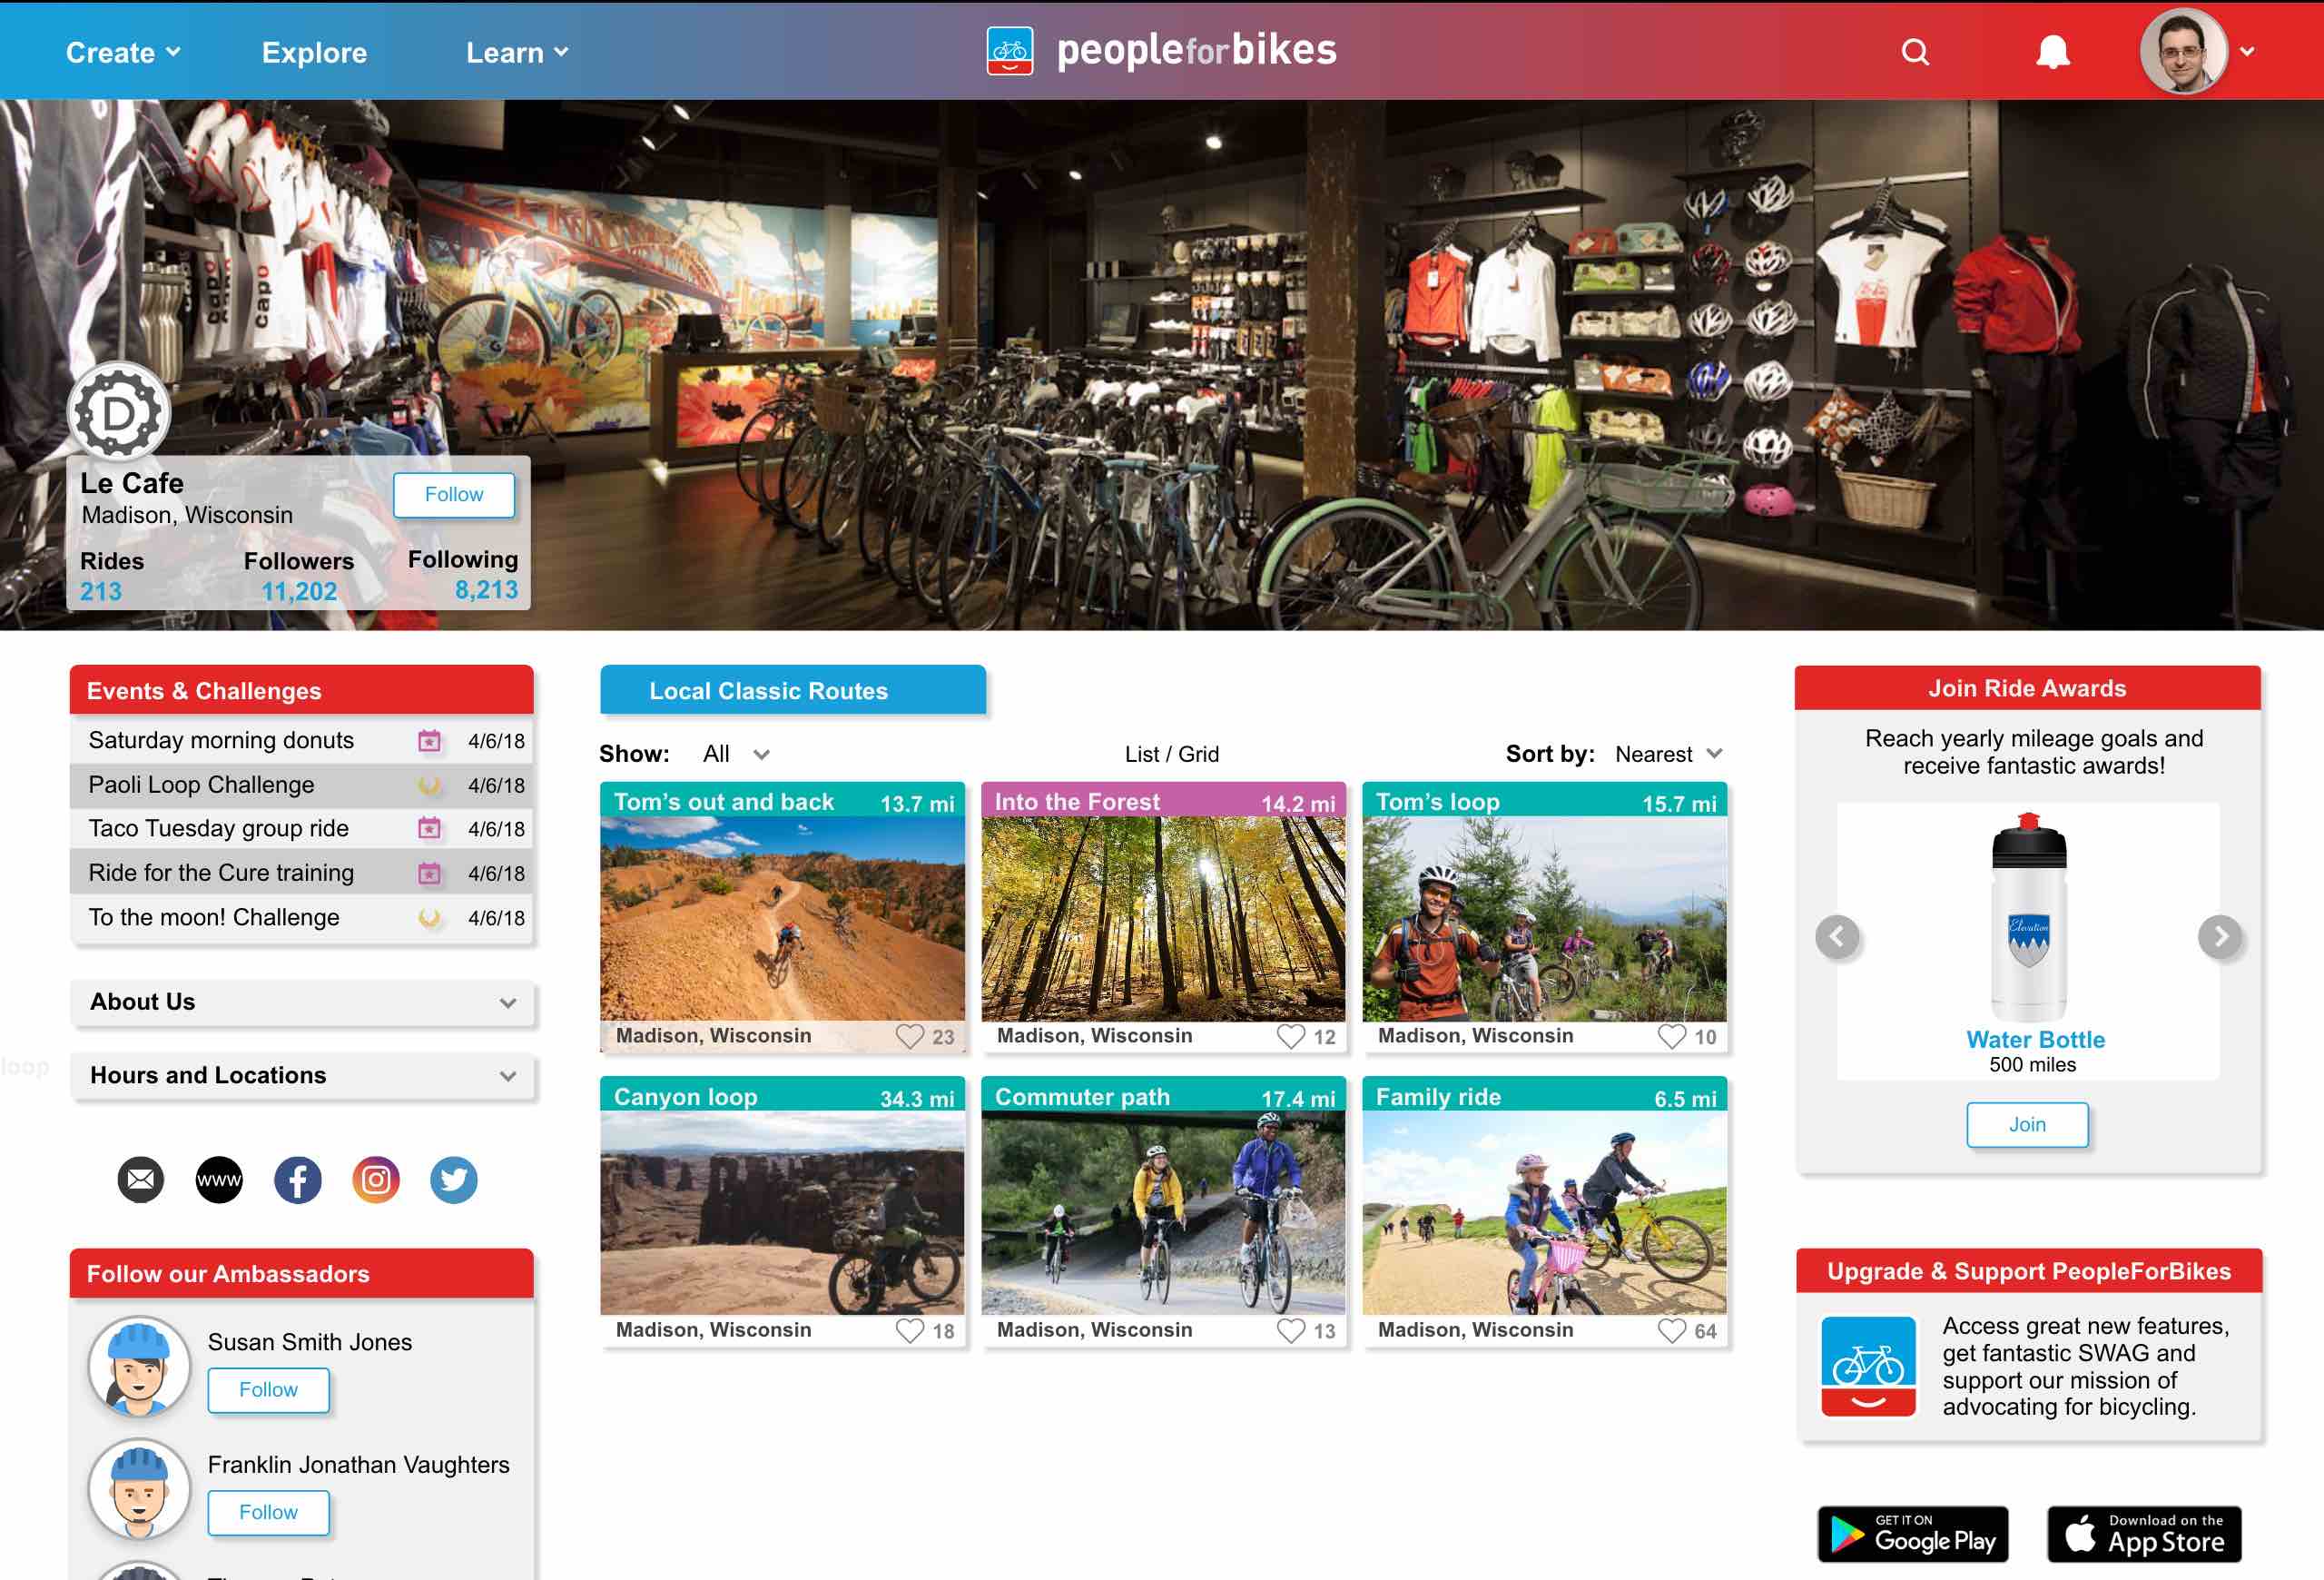 Any business or individual can create a page in the PeopleForBikes Ride Guide, where ride routes, events, challenges and other information can be uploaded.